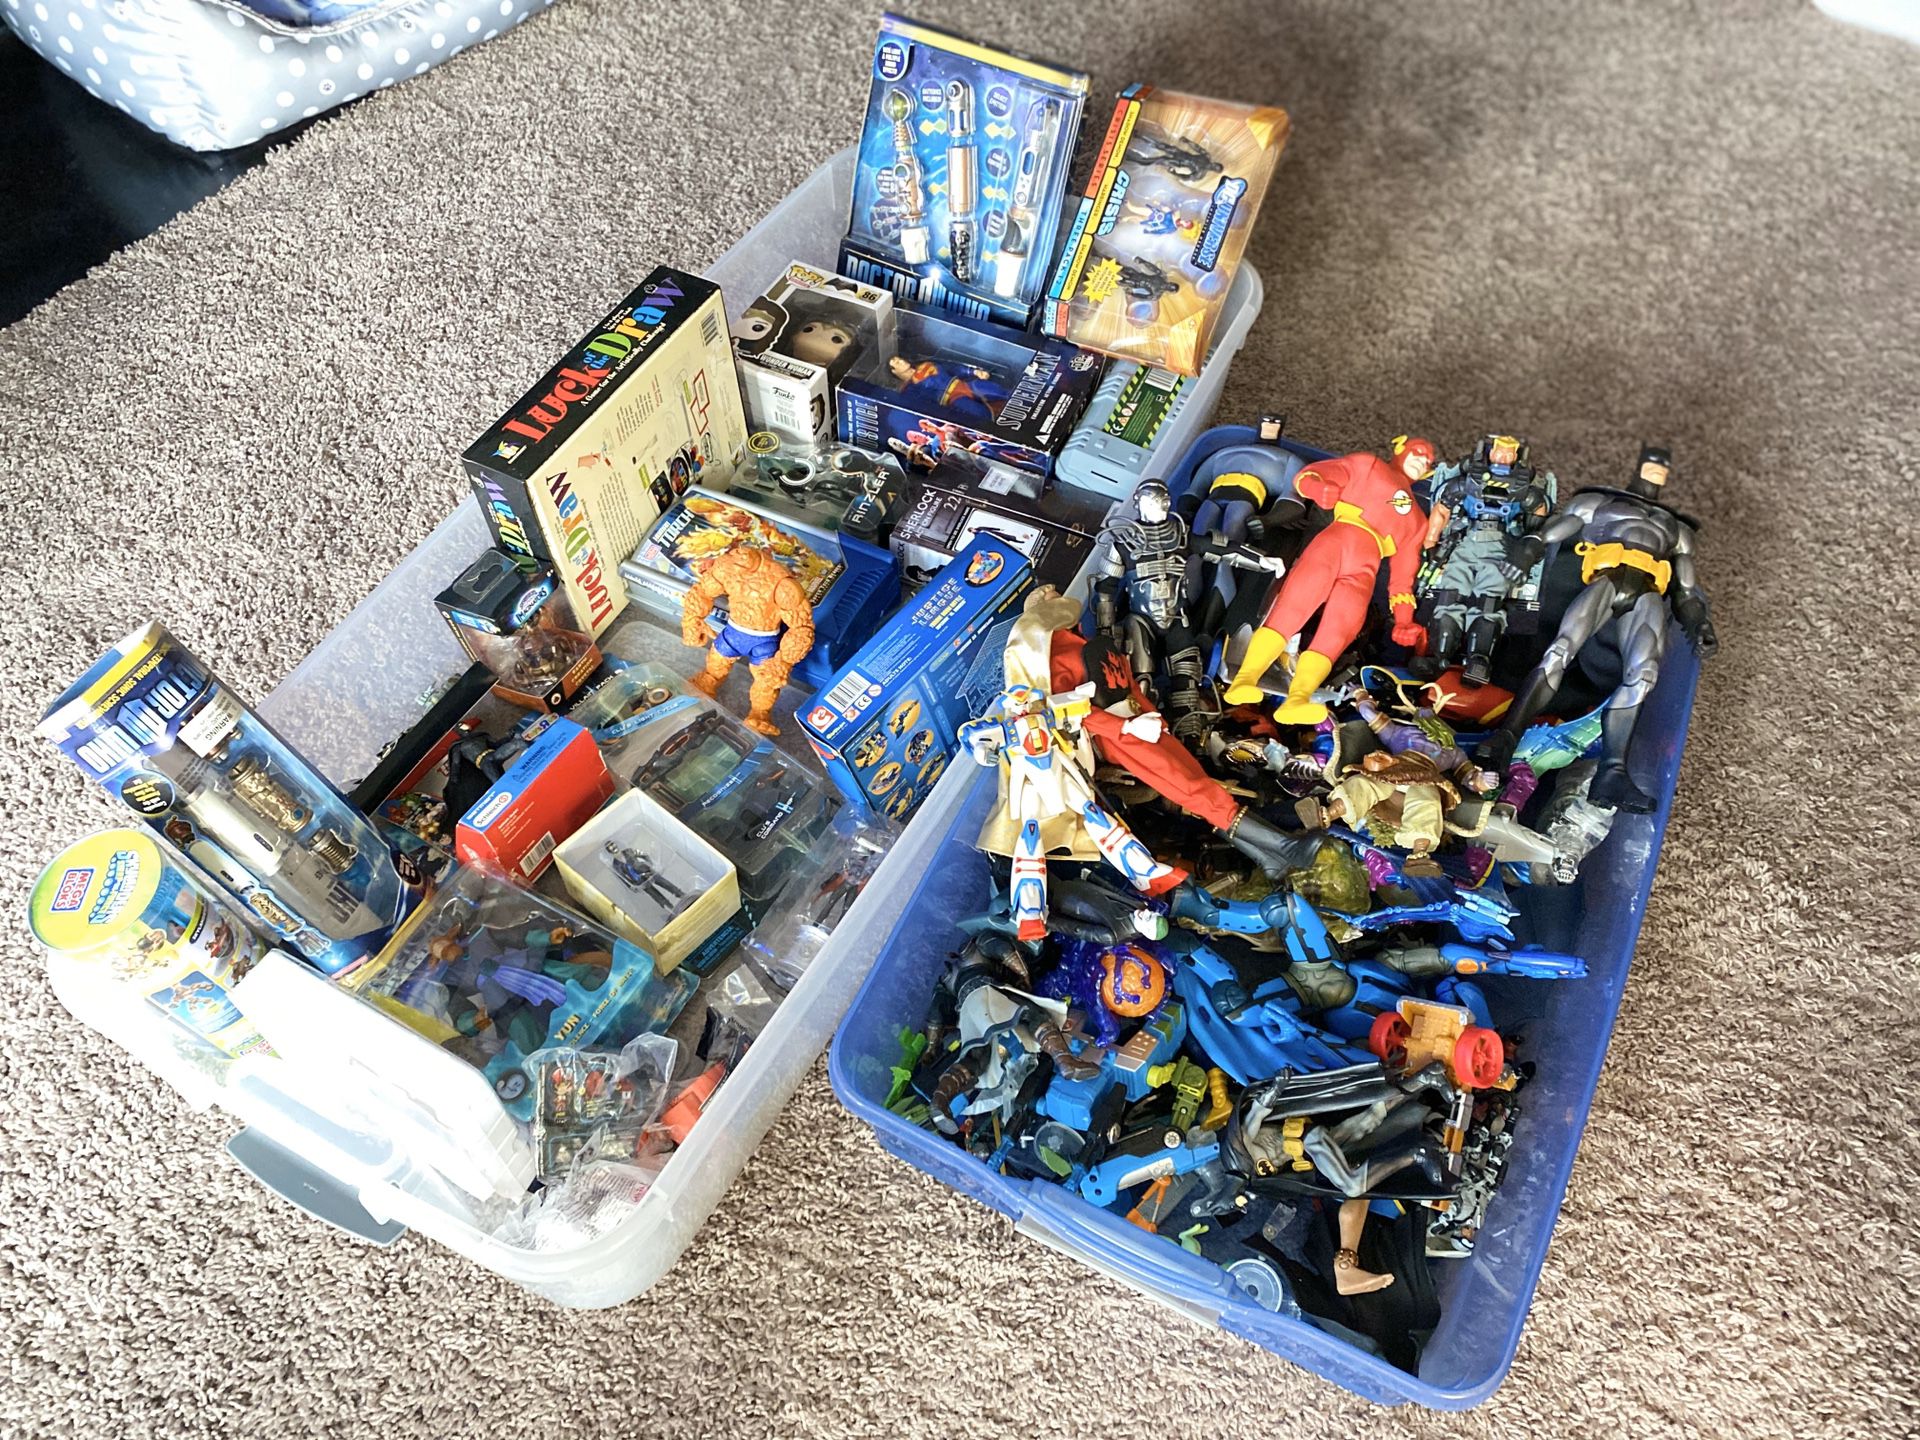 Collection toys